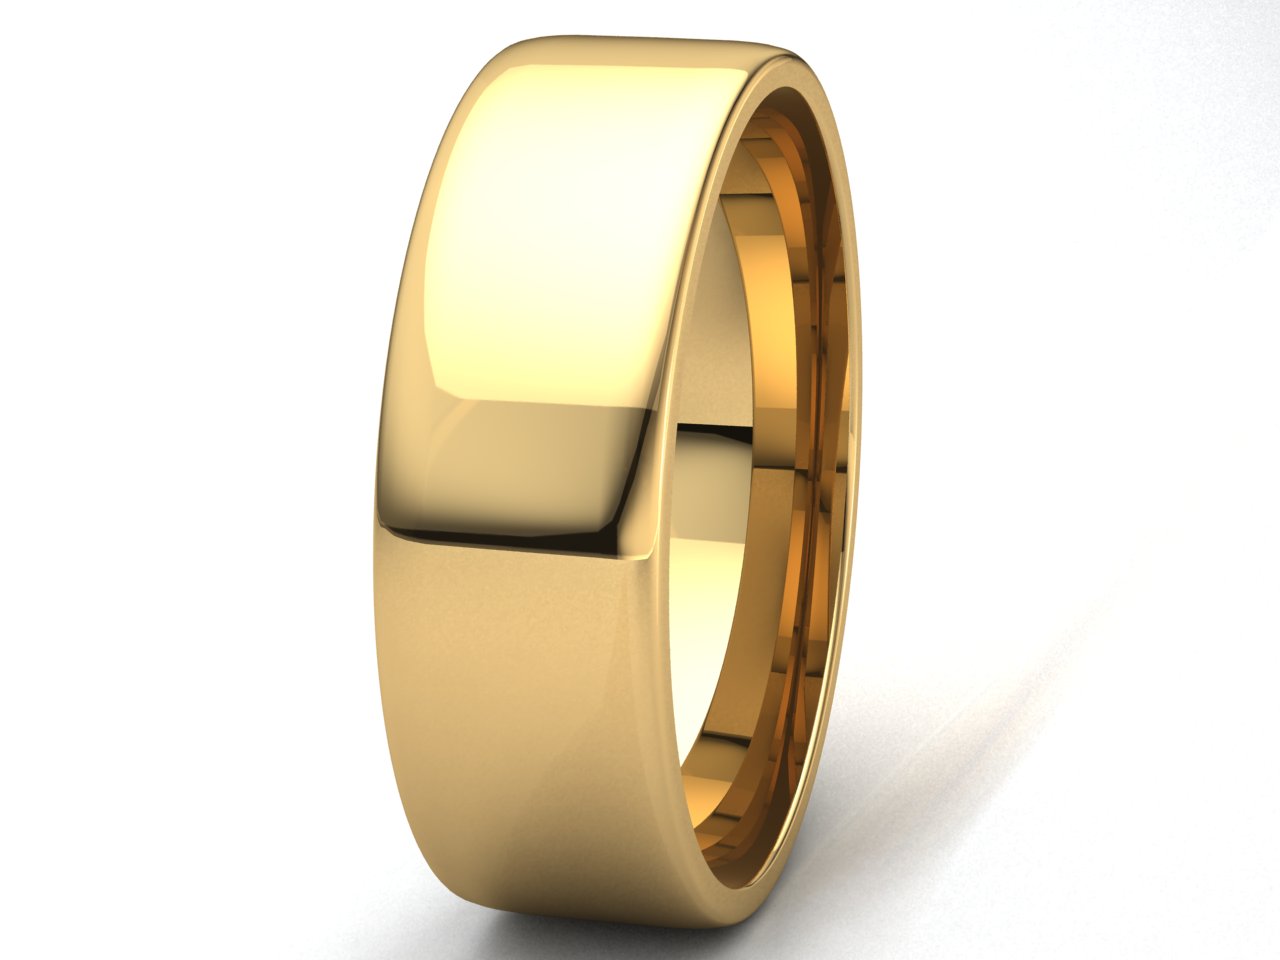 SOLID 10K WHITE YELLOW ROSE GOLD PLAIN COMFORT FIT WEDDING BAND RING MENS WOMEN 